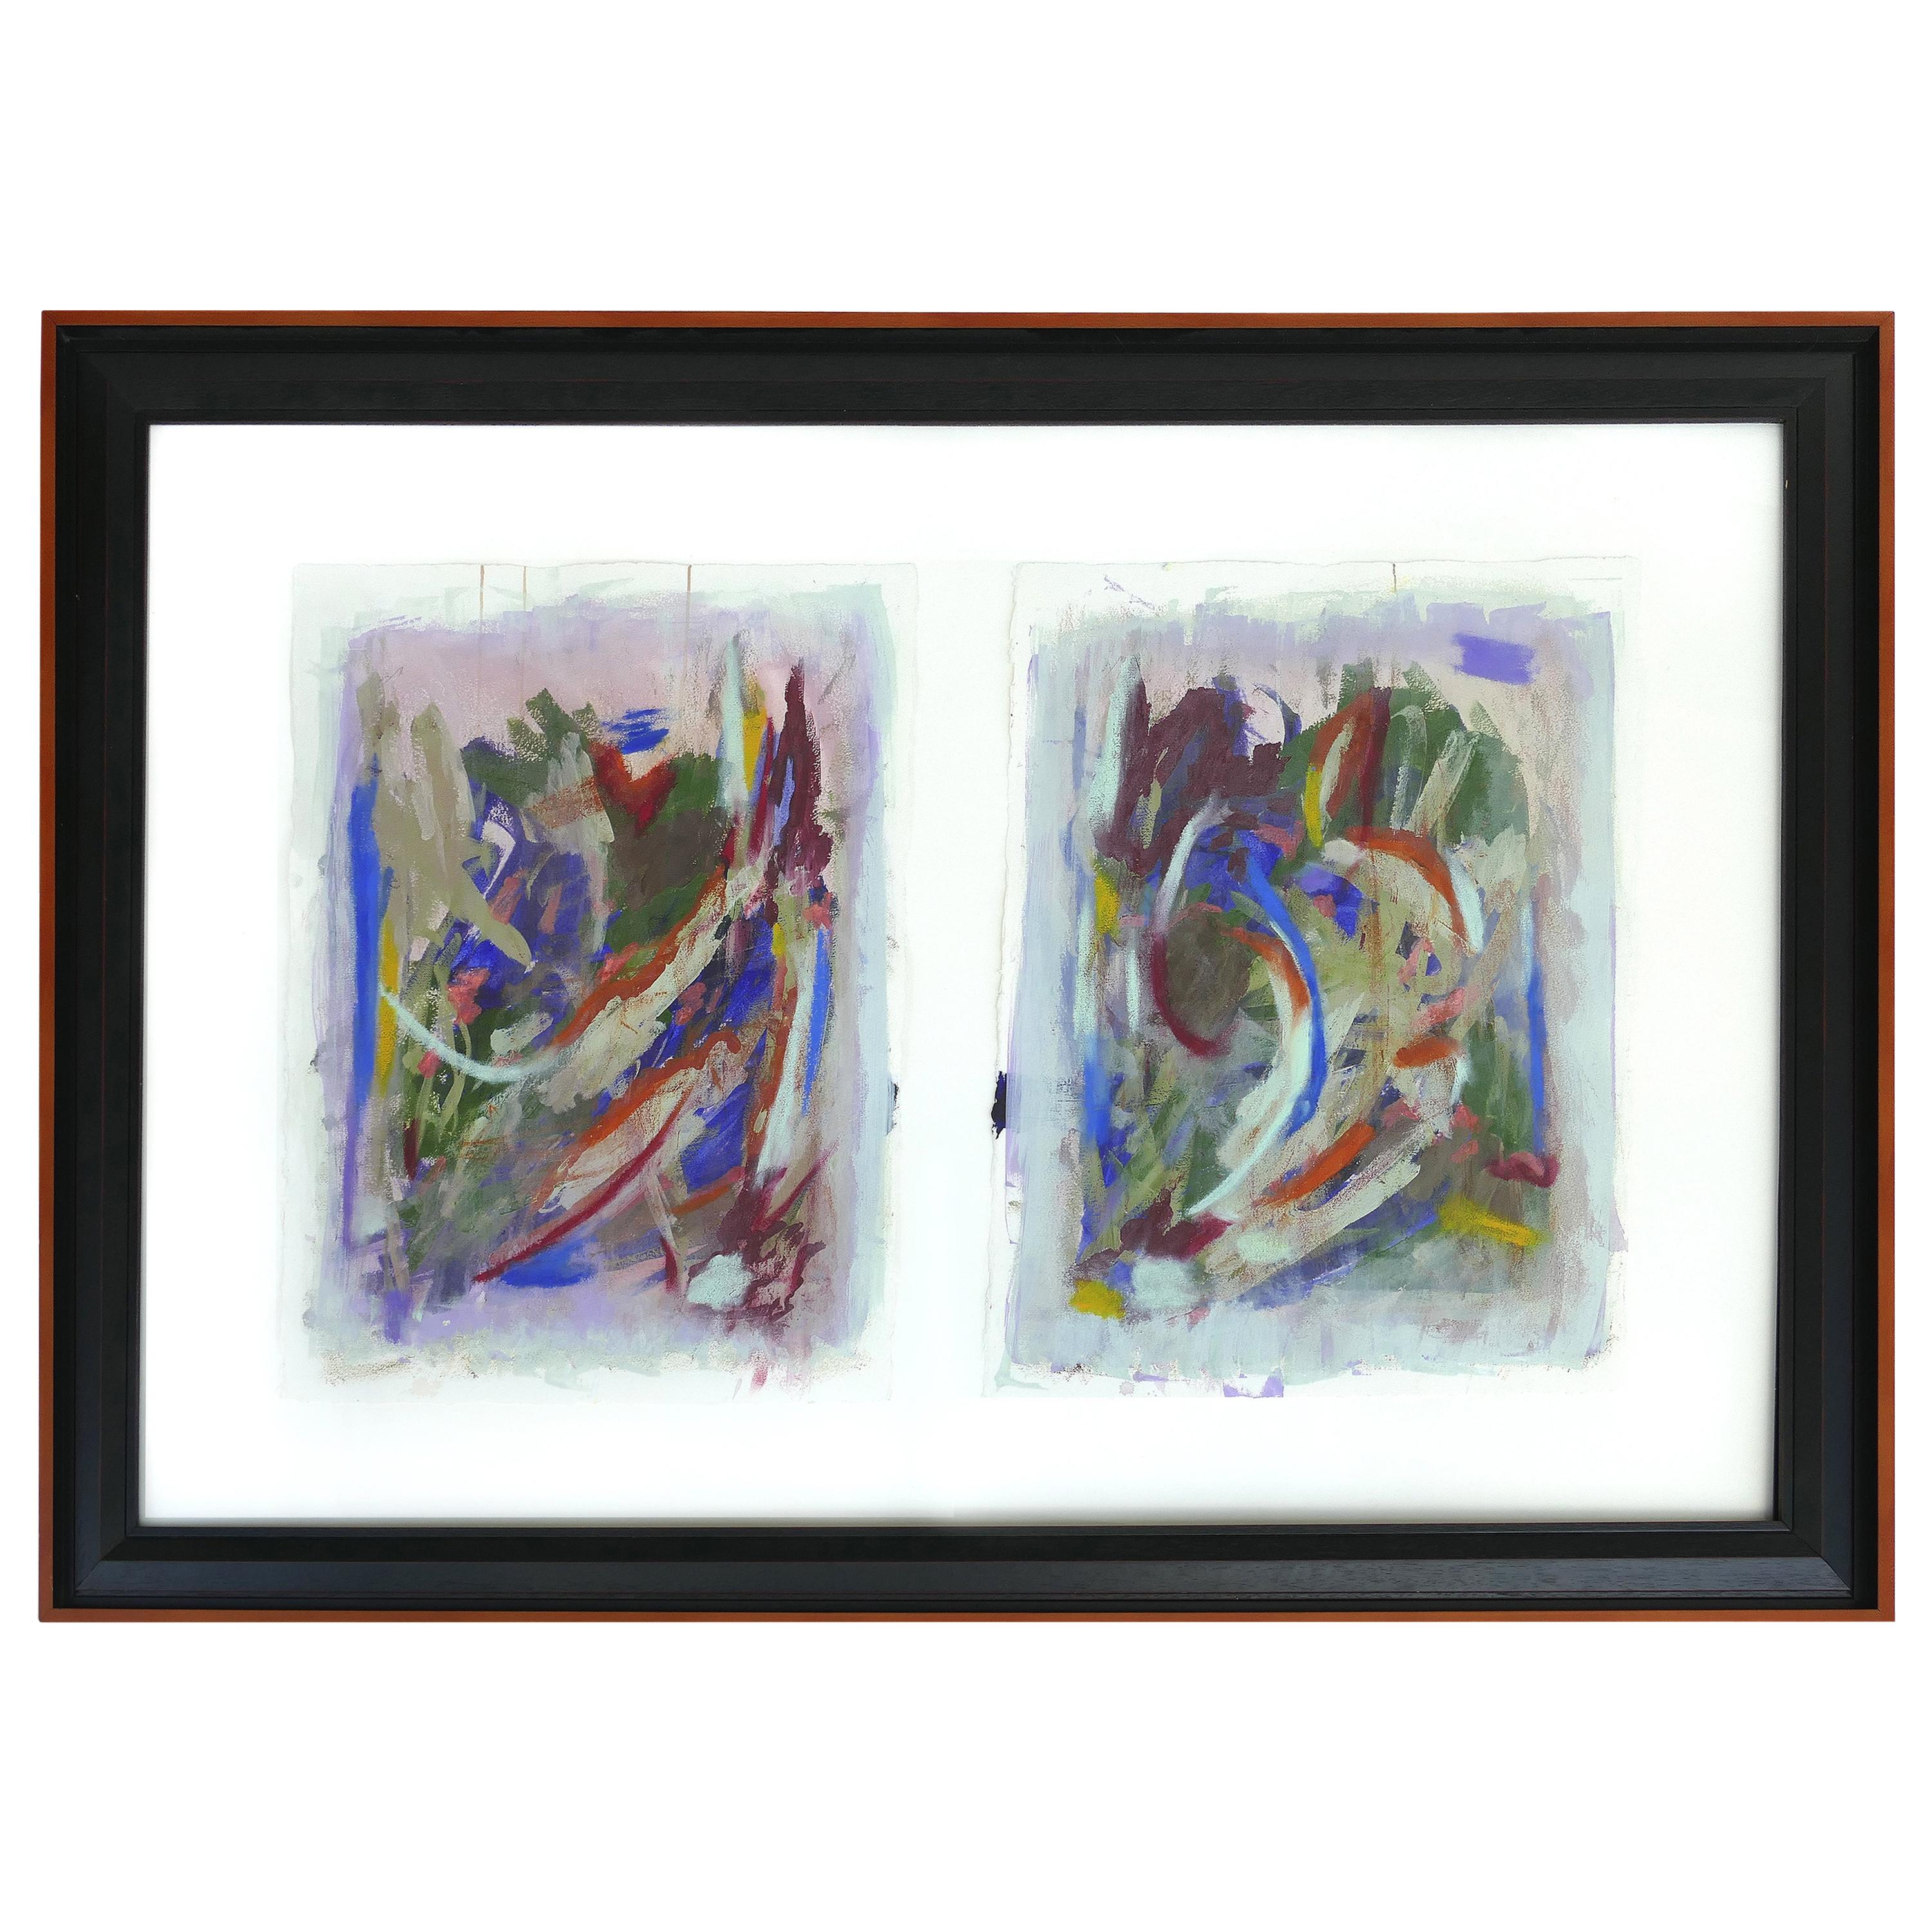 Large Vintage Abstract Diptych Painting, Signed, 2014, Framed Under Glass For Sale